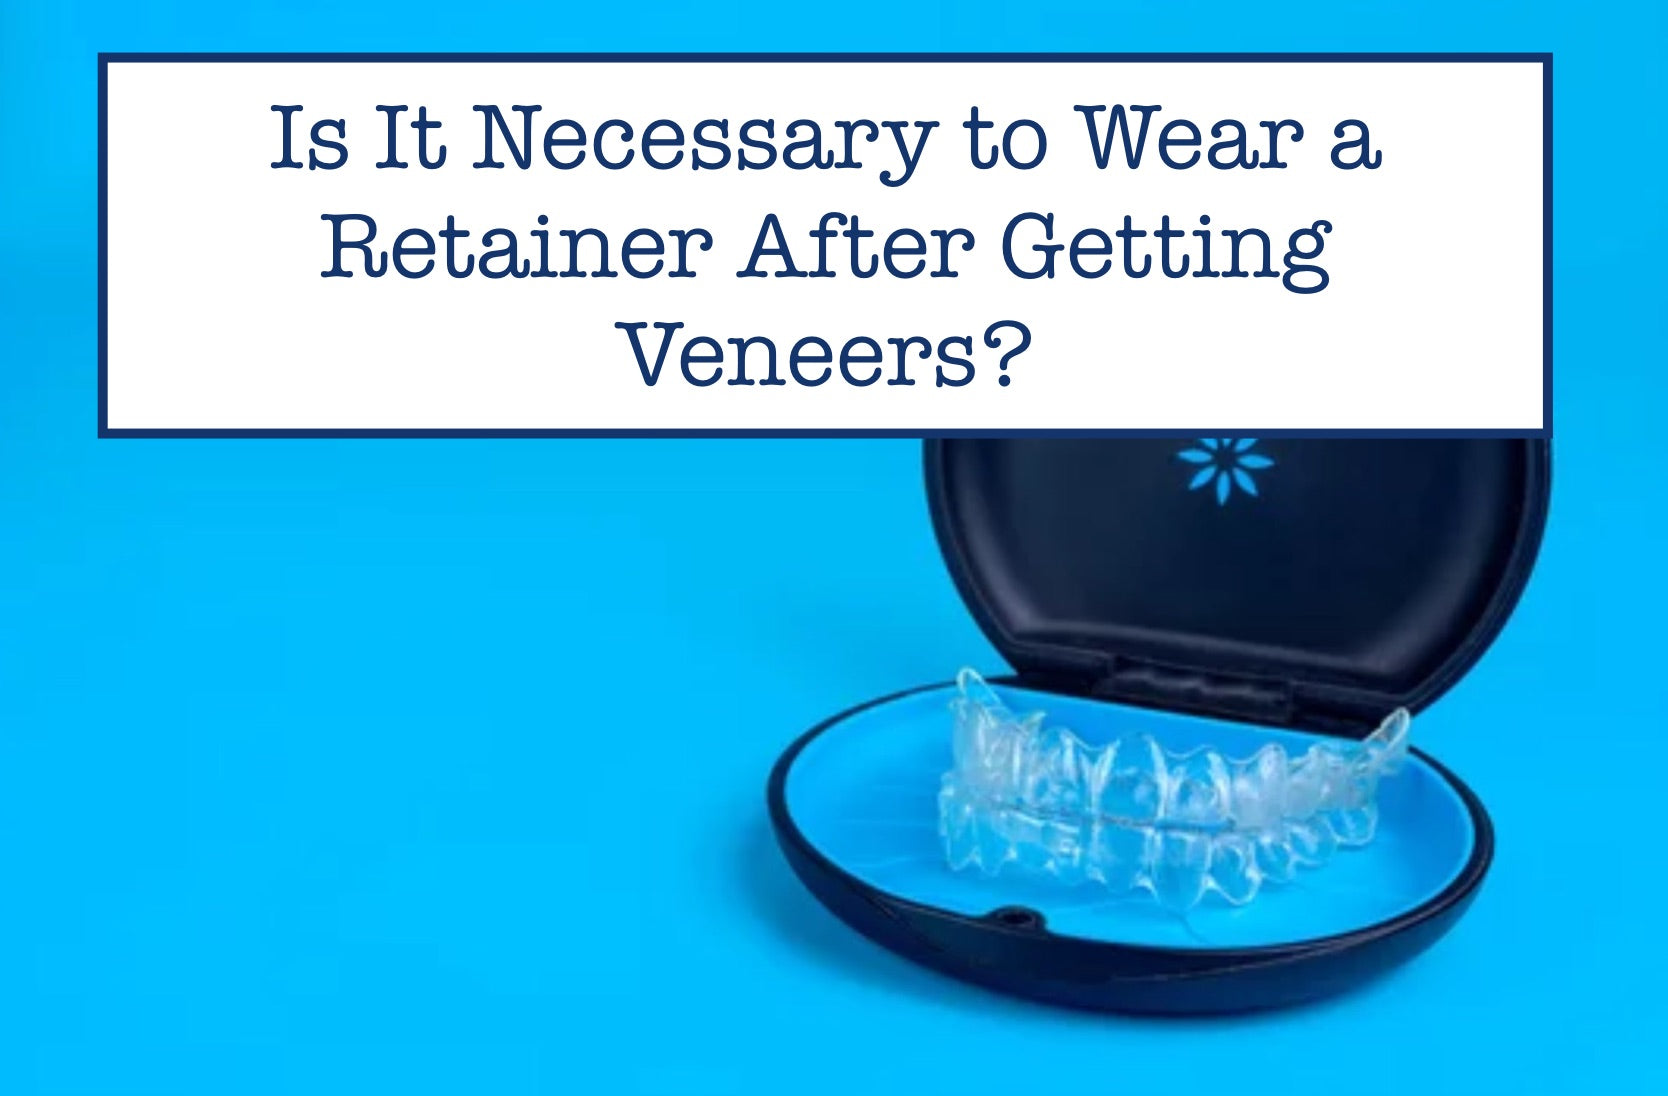 Is It Necessary to Wear a Retainer After Getting Veneers?